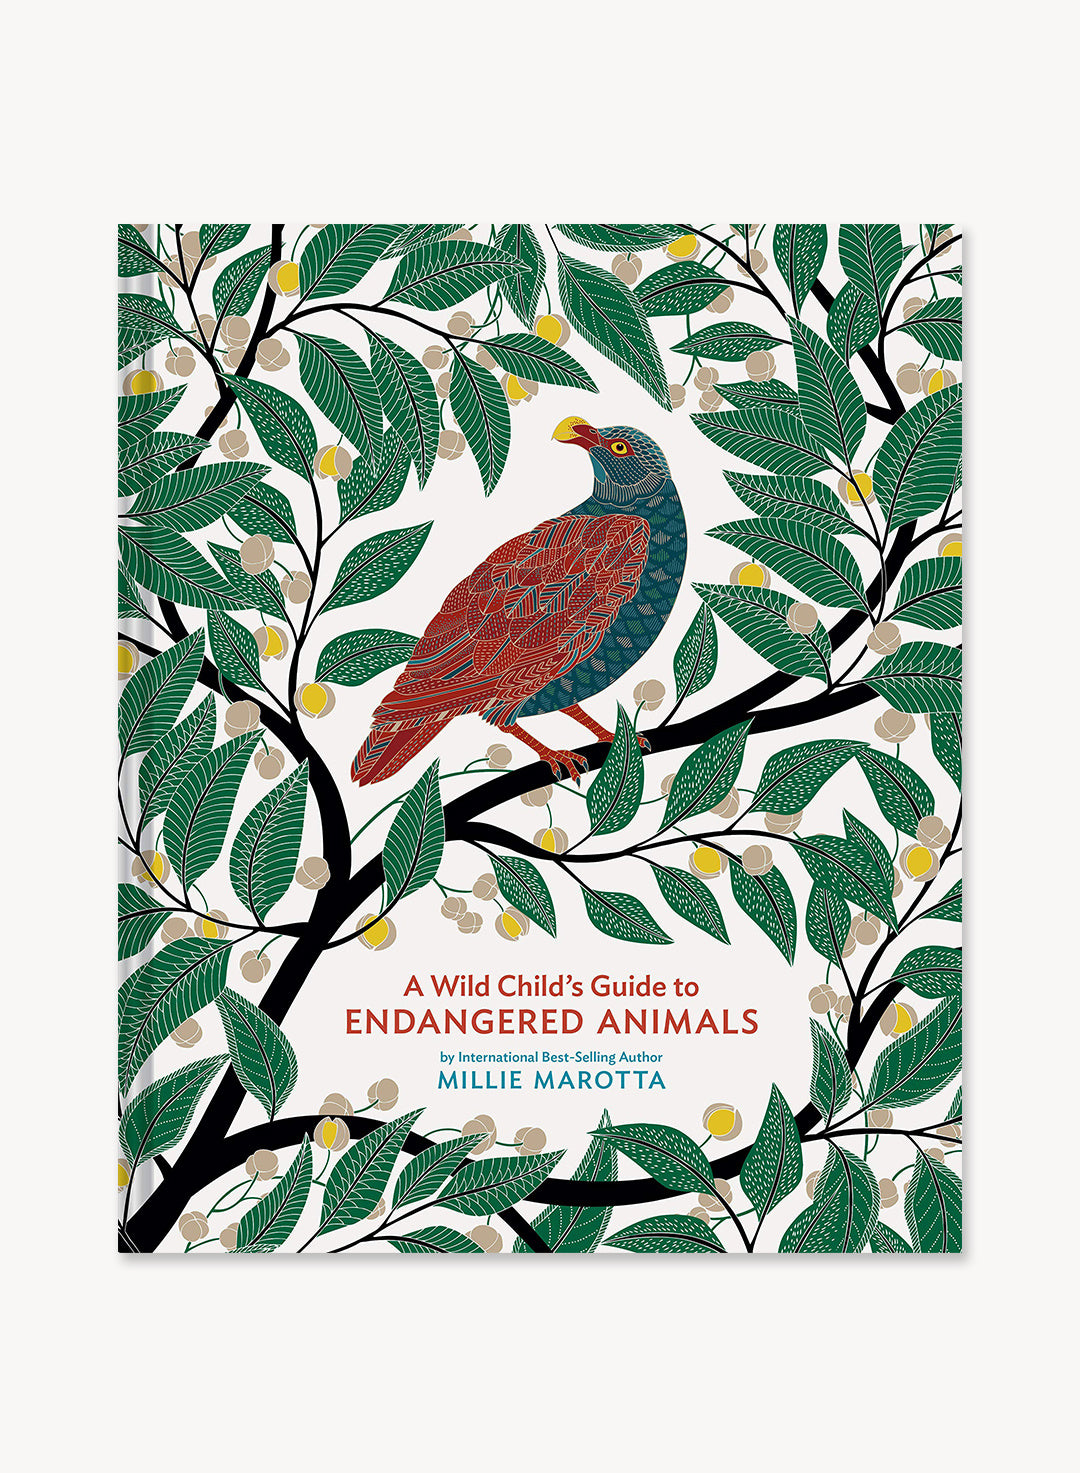 A Wild Child's Guide to Endangered Animals